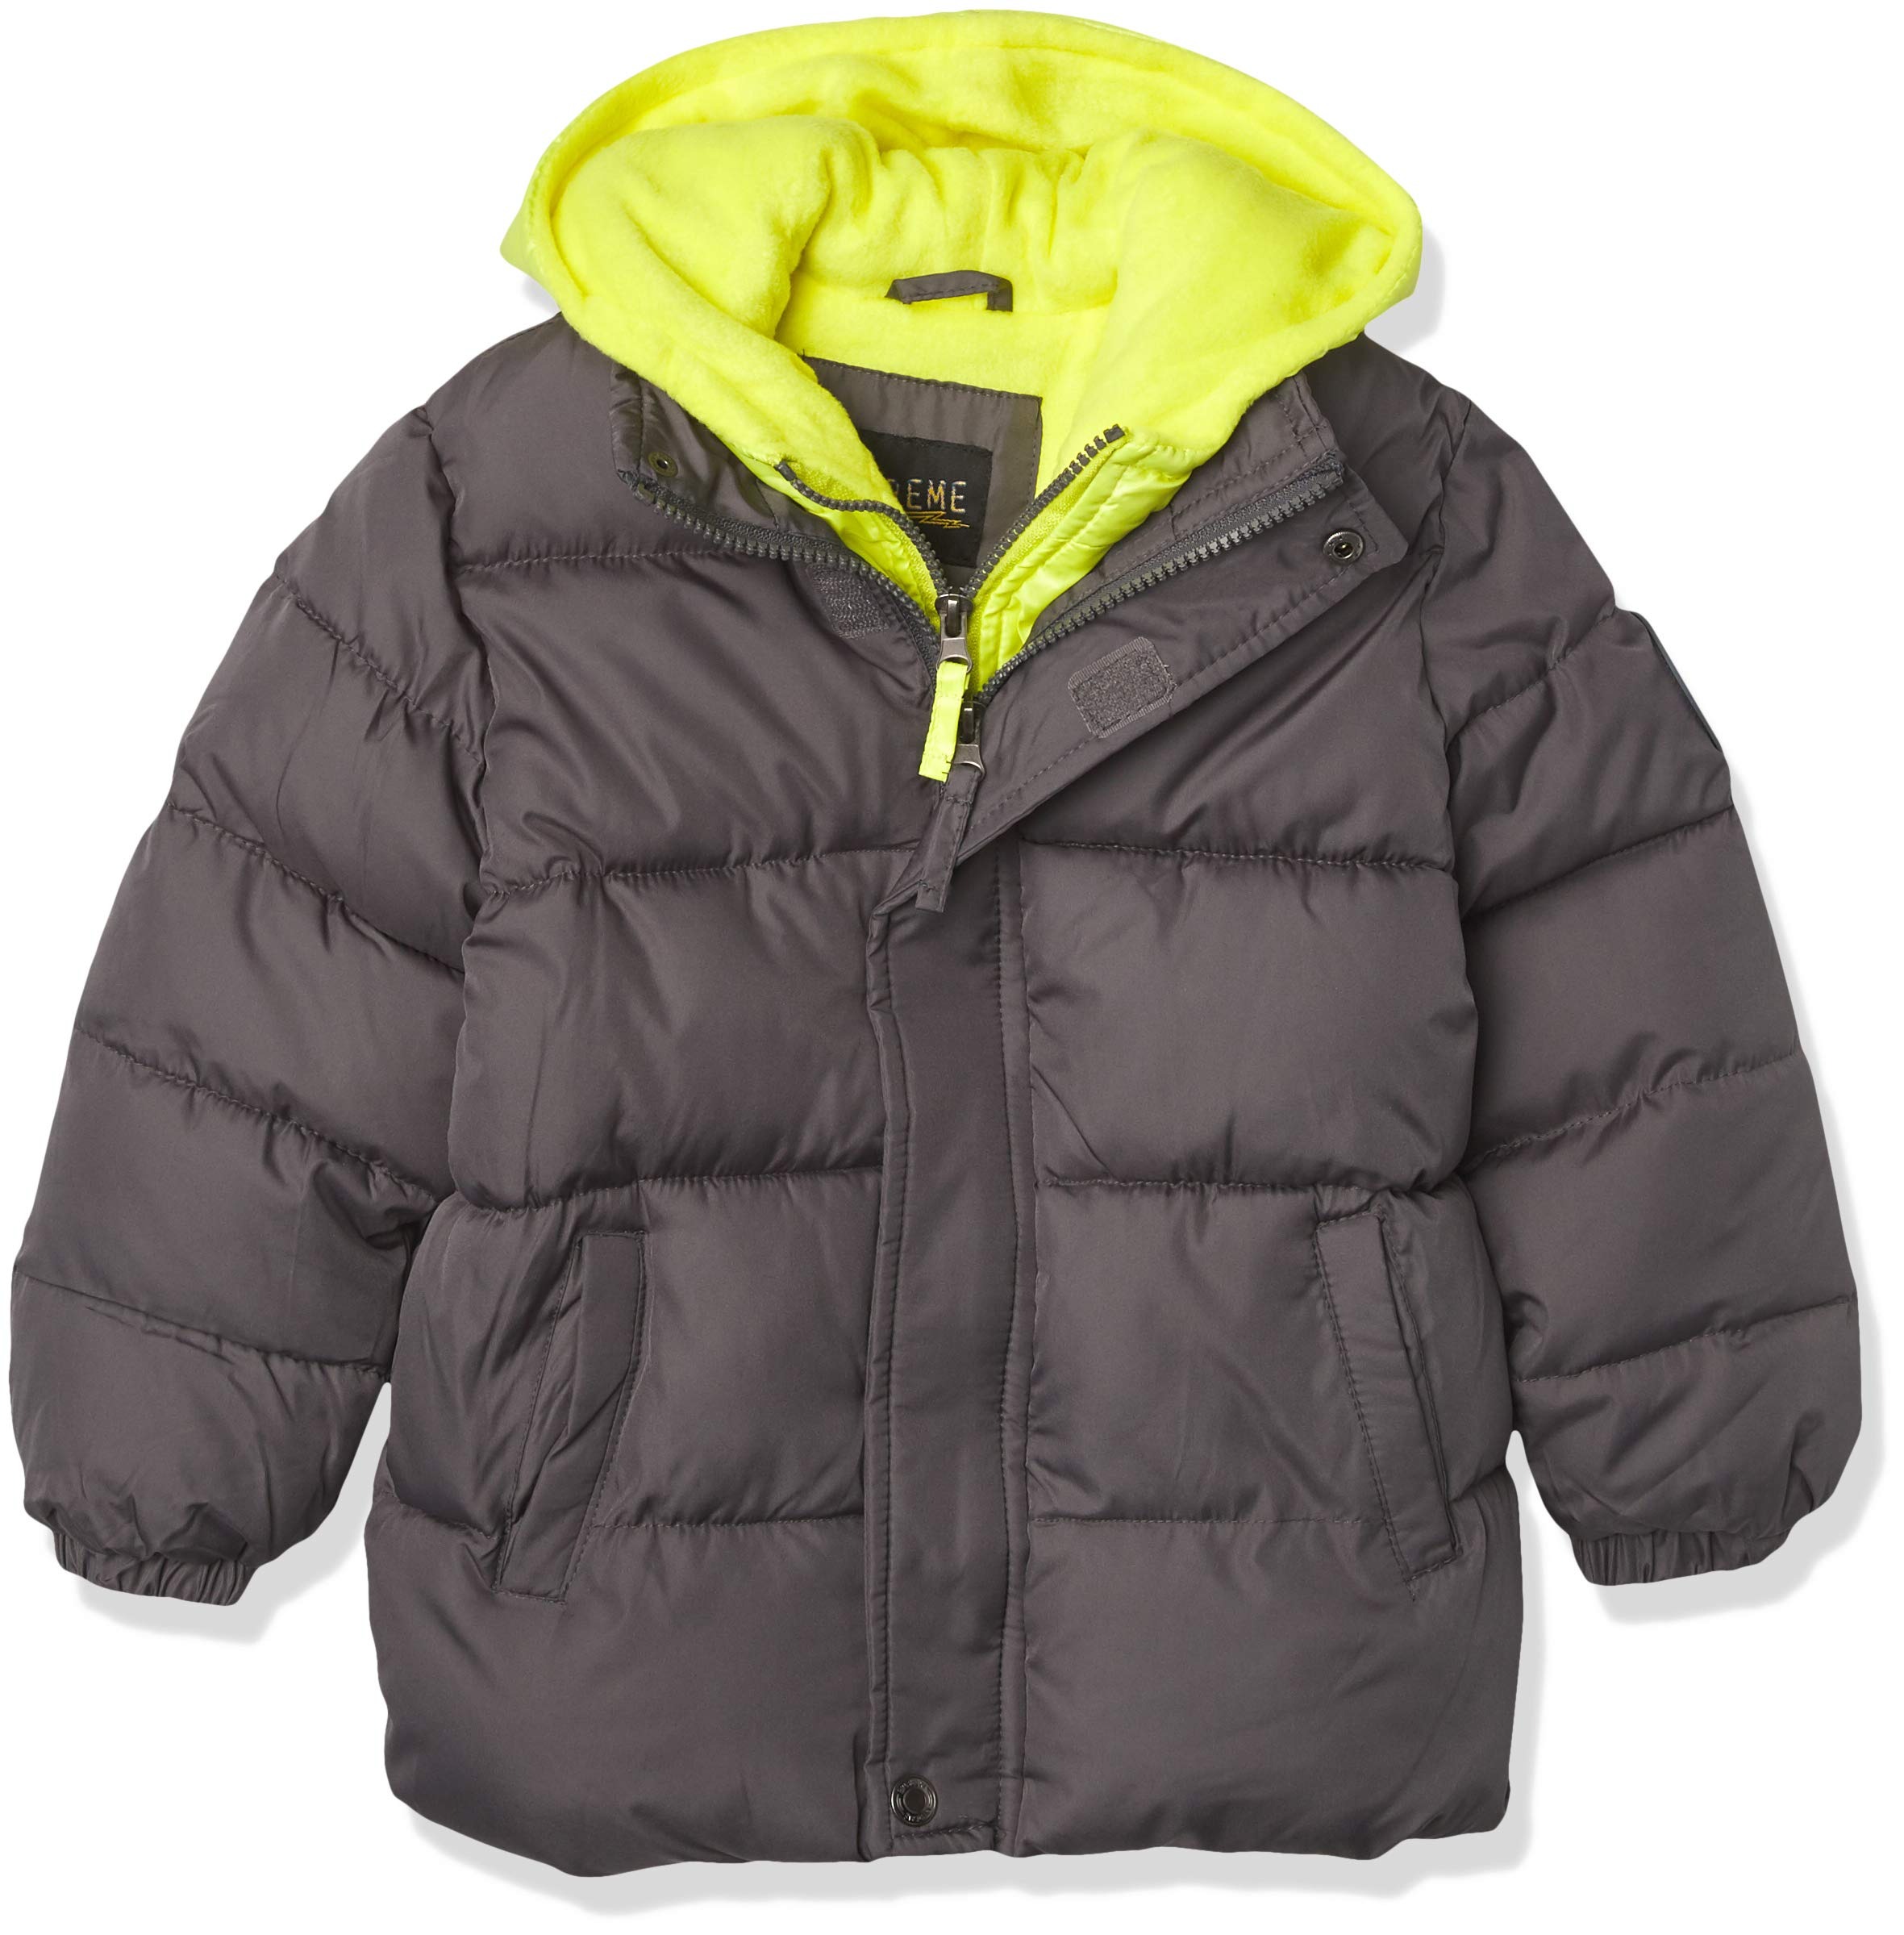 Toddler Boys' iXtreme Puffer w Vestee (Charcoal) $7 + FS w/ Prime